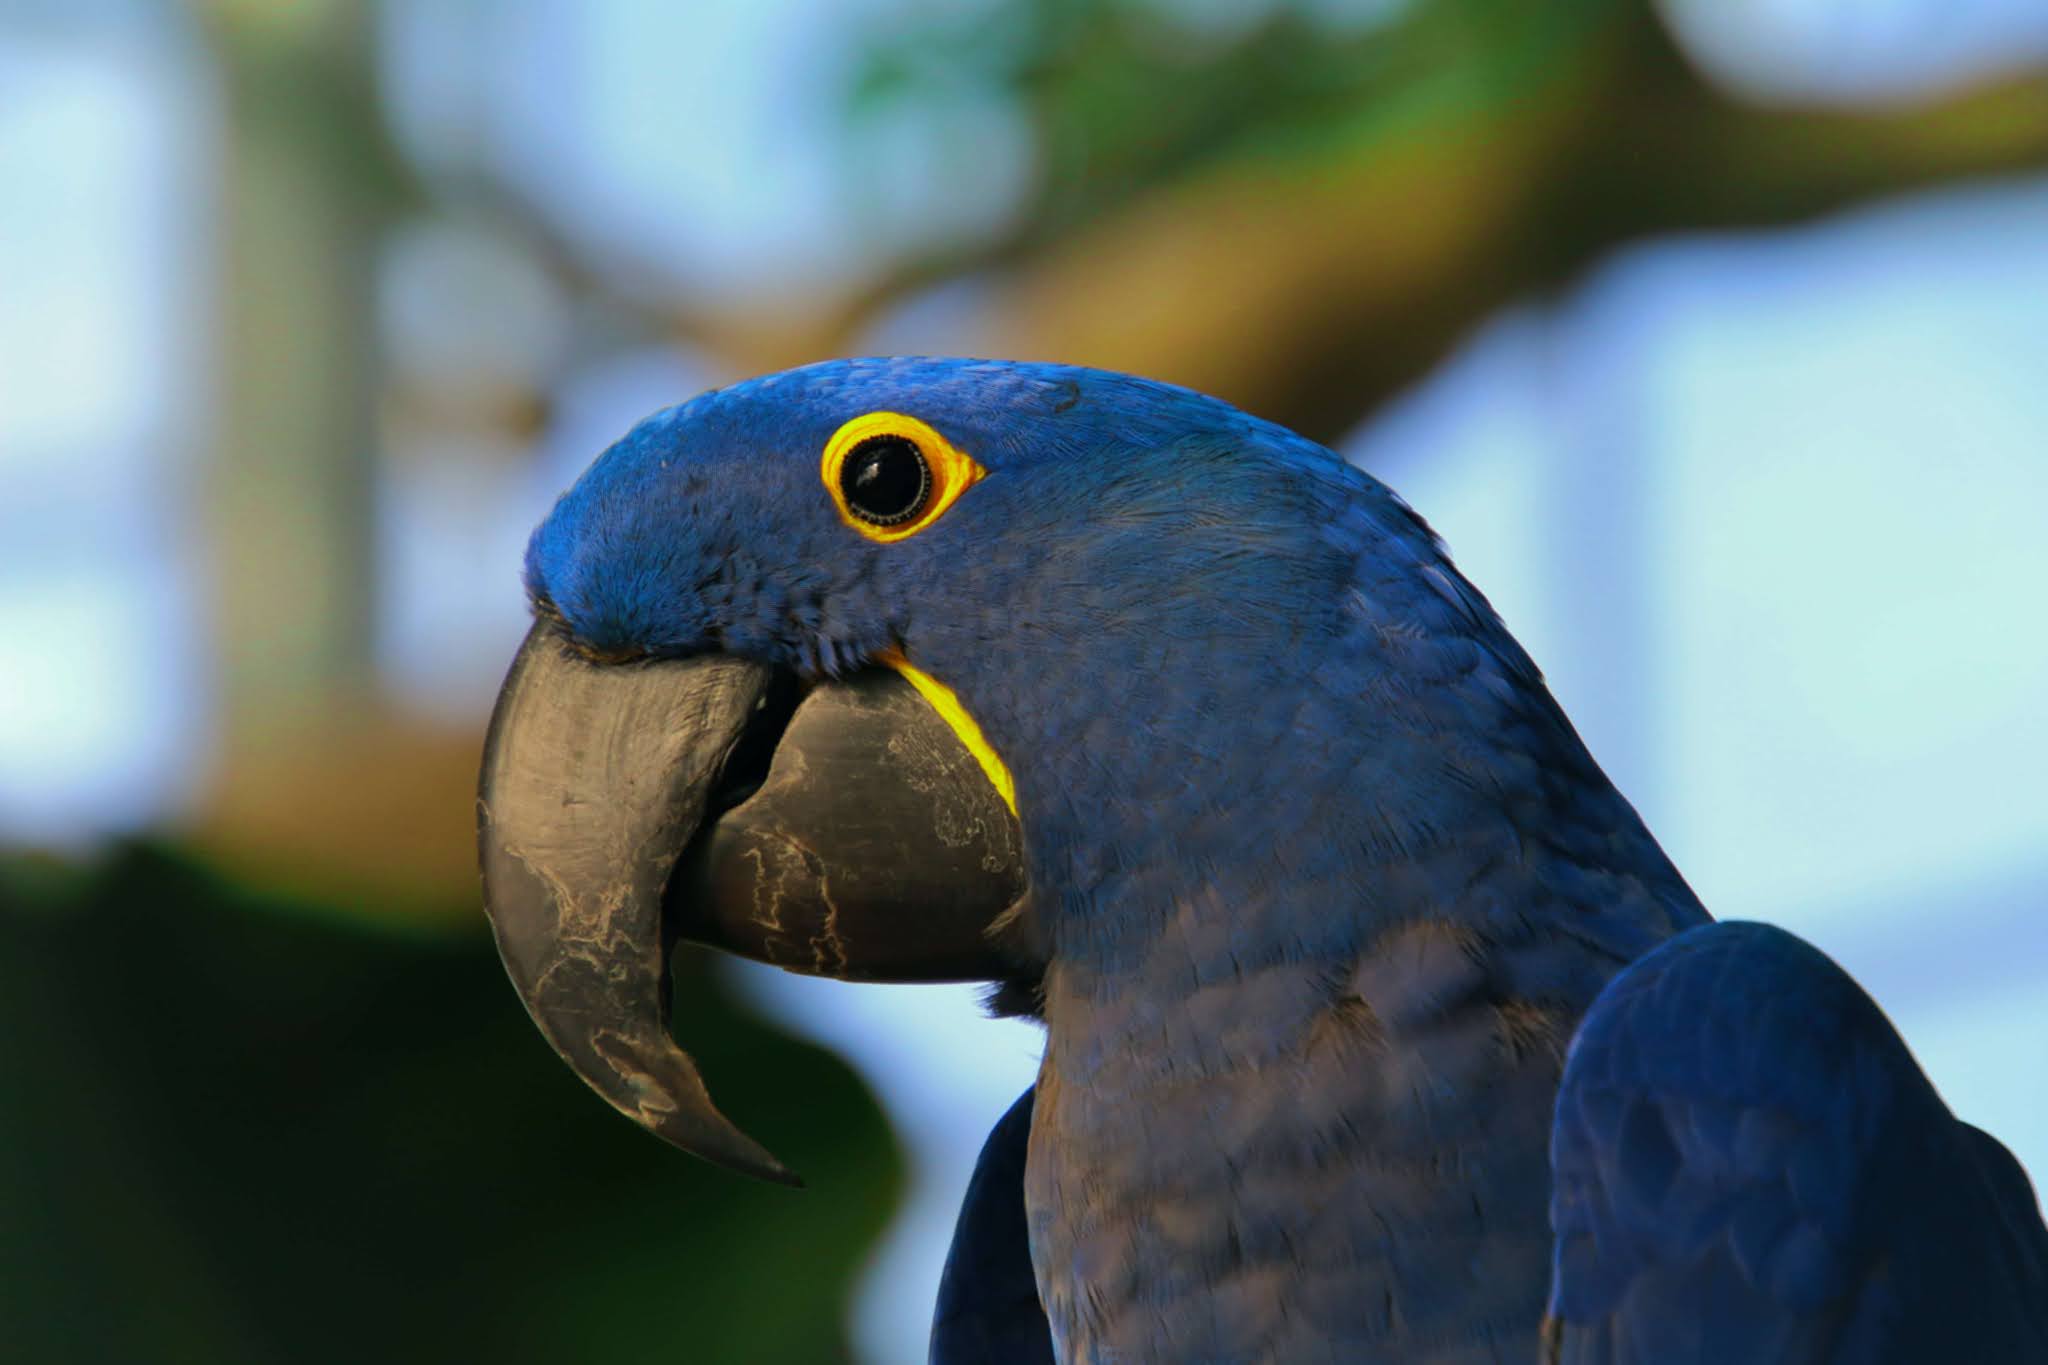 Hyacinth Macaw The Largest Parrots Personality, Facts and Information